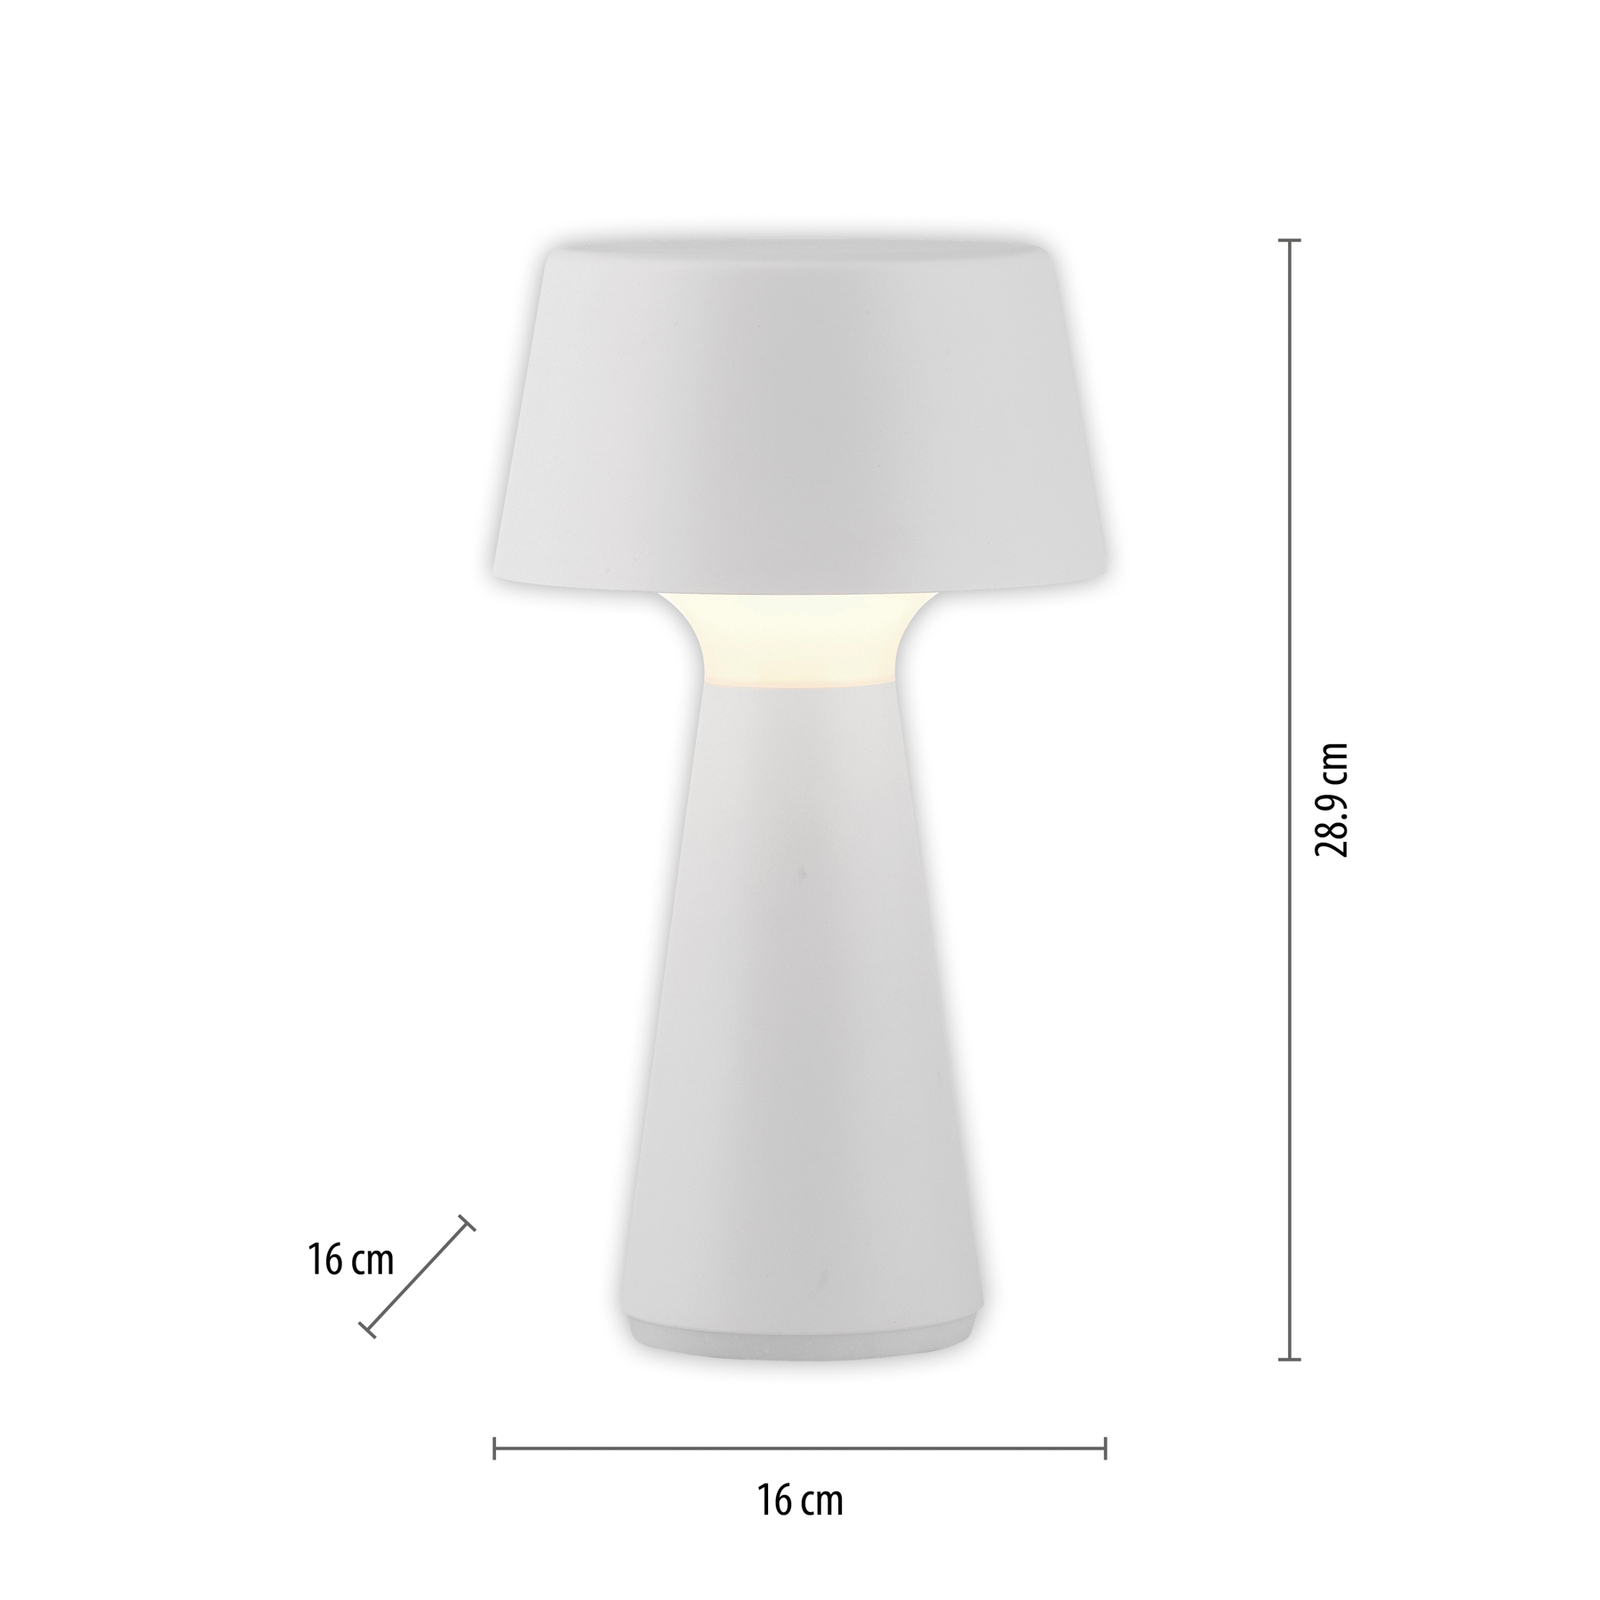 JUST LIGHT. Abera rechargeable LED table lamp white plastic IP54